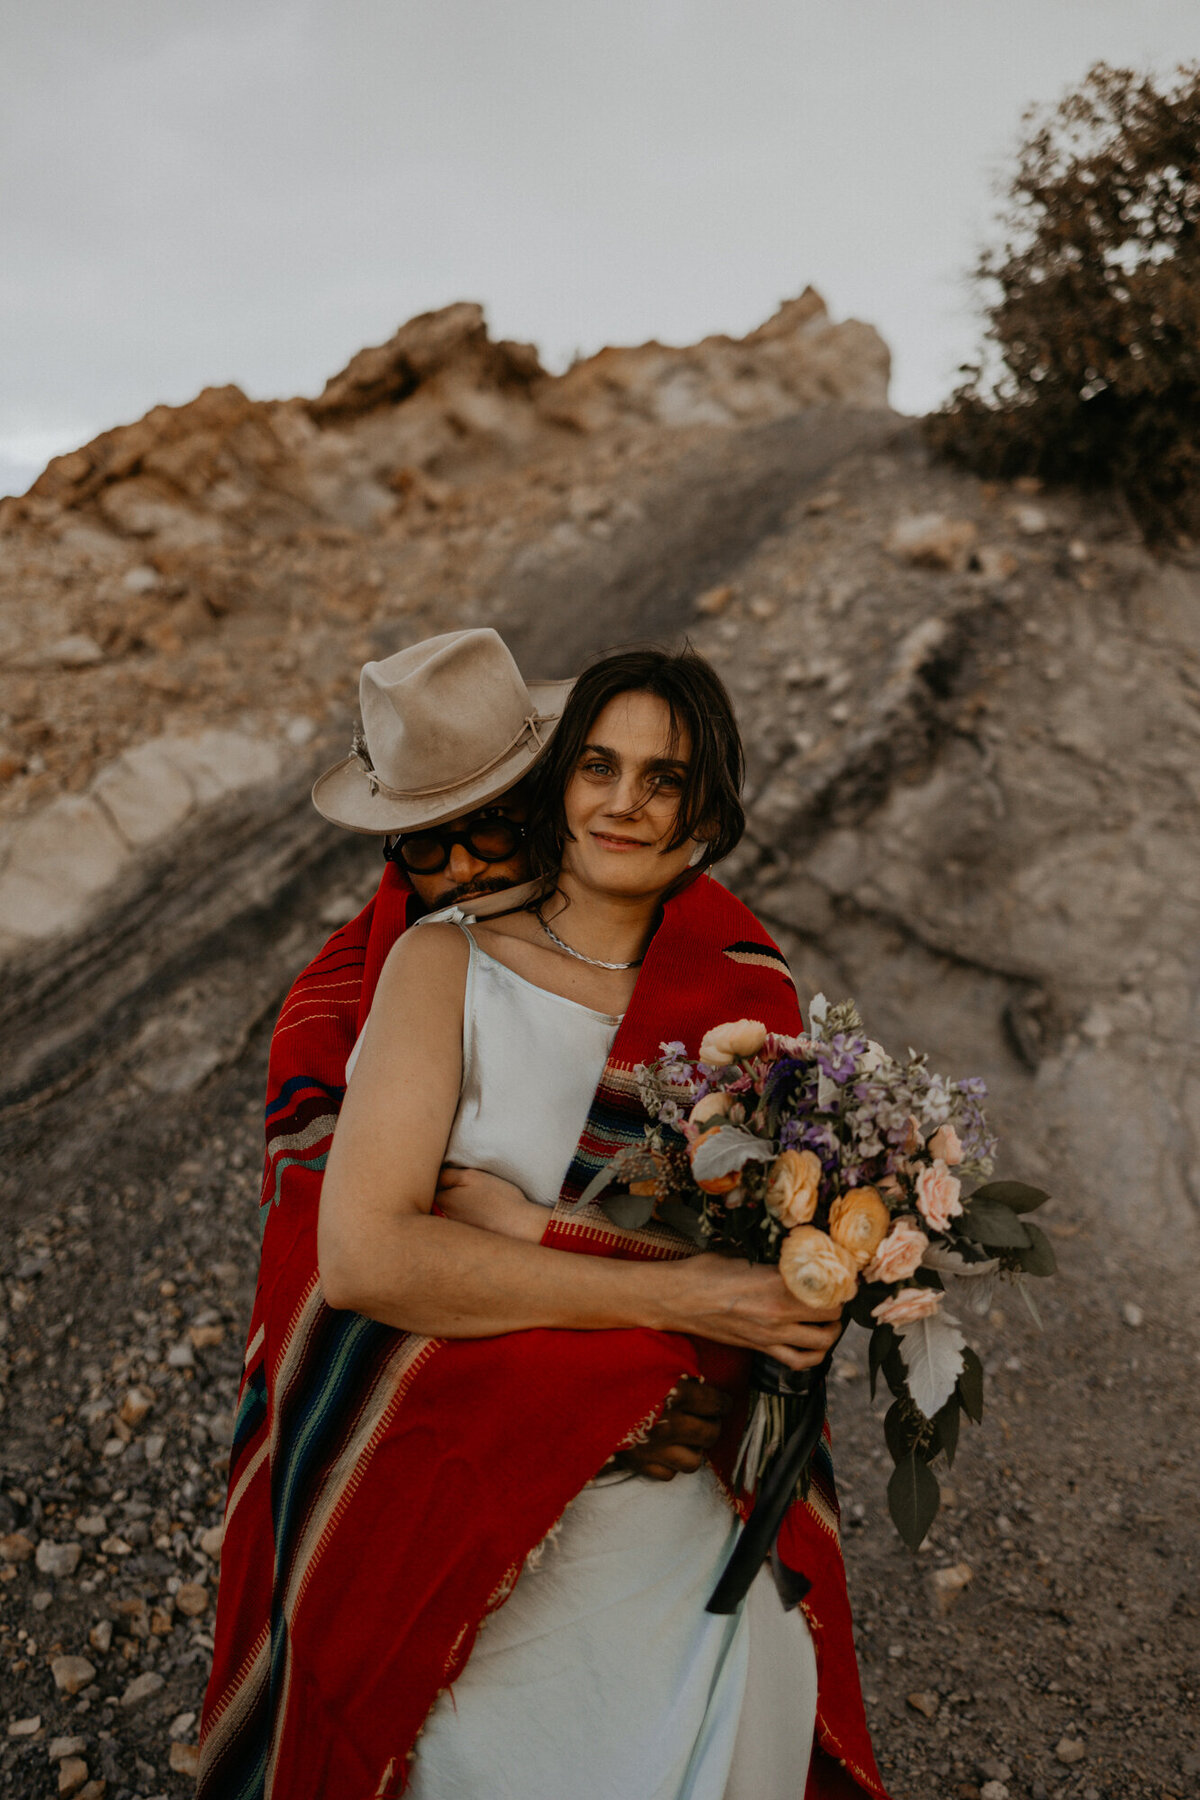 a groom wrapped in a native American blanket hugging his new bride in the desert